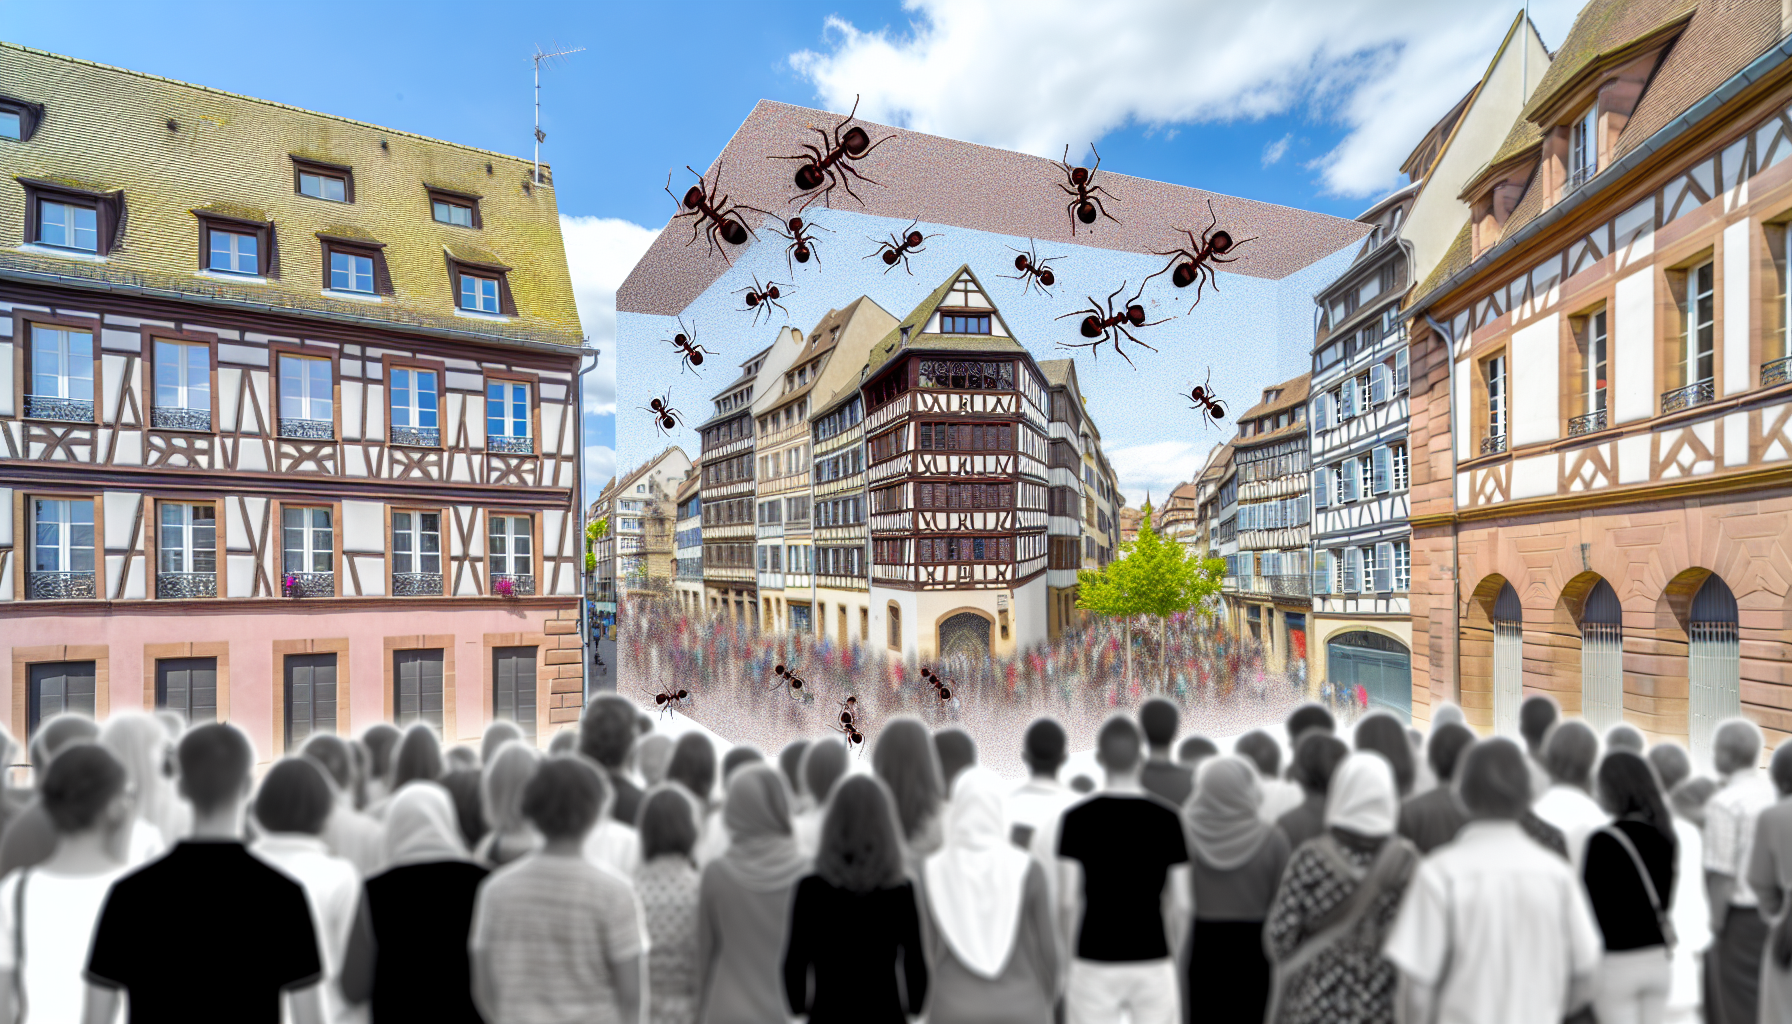 Resilient invader ants defy insecticides in Strasbourg: a call for harmonious coexistence